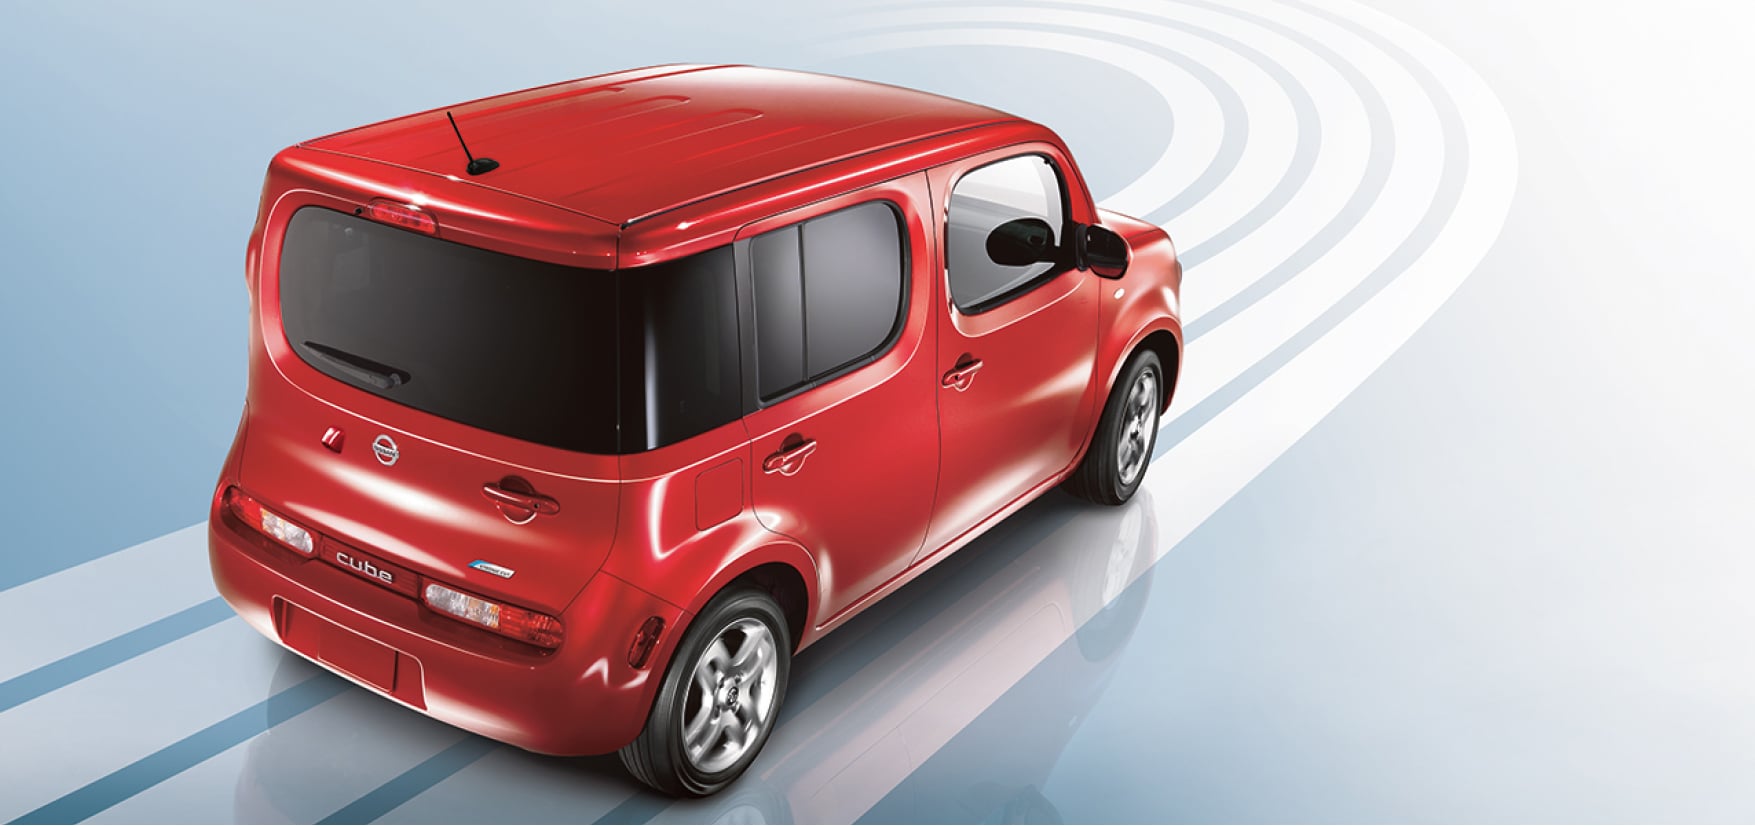 Red Nissan Cube driving on blue background to demonstrate fuel economy